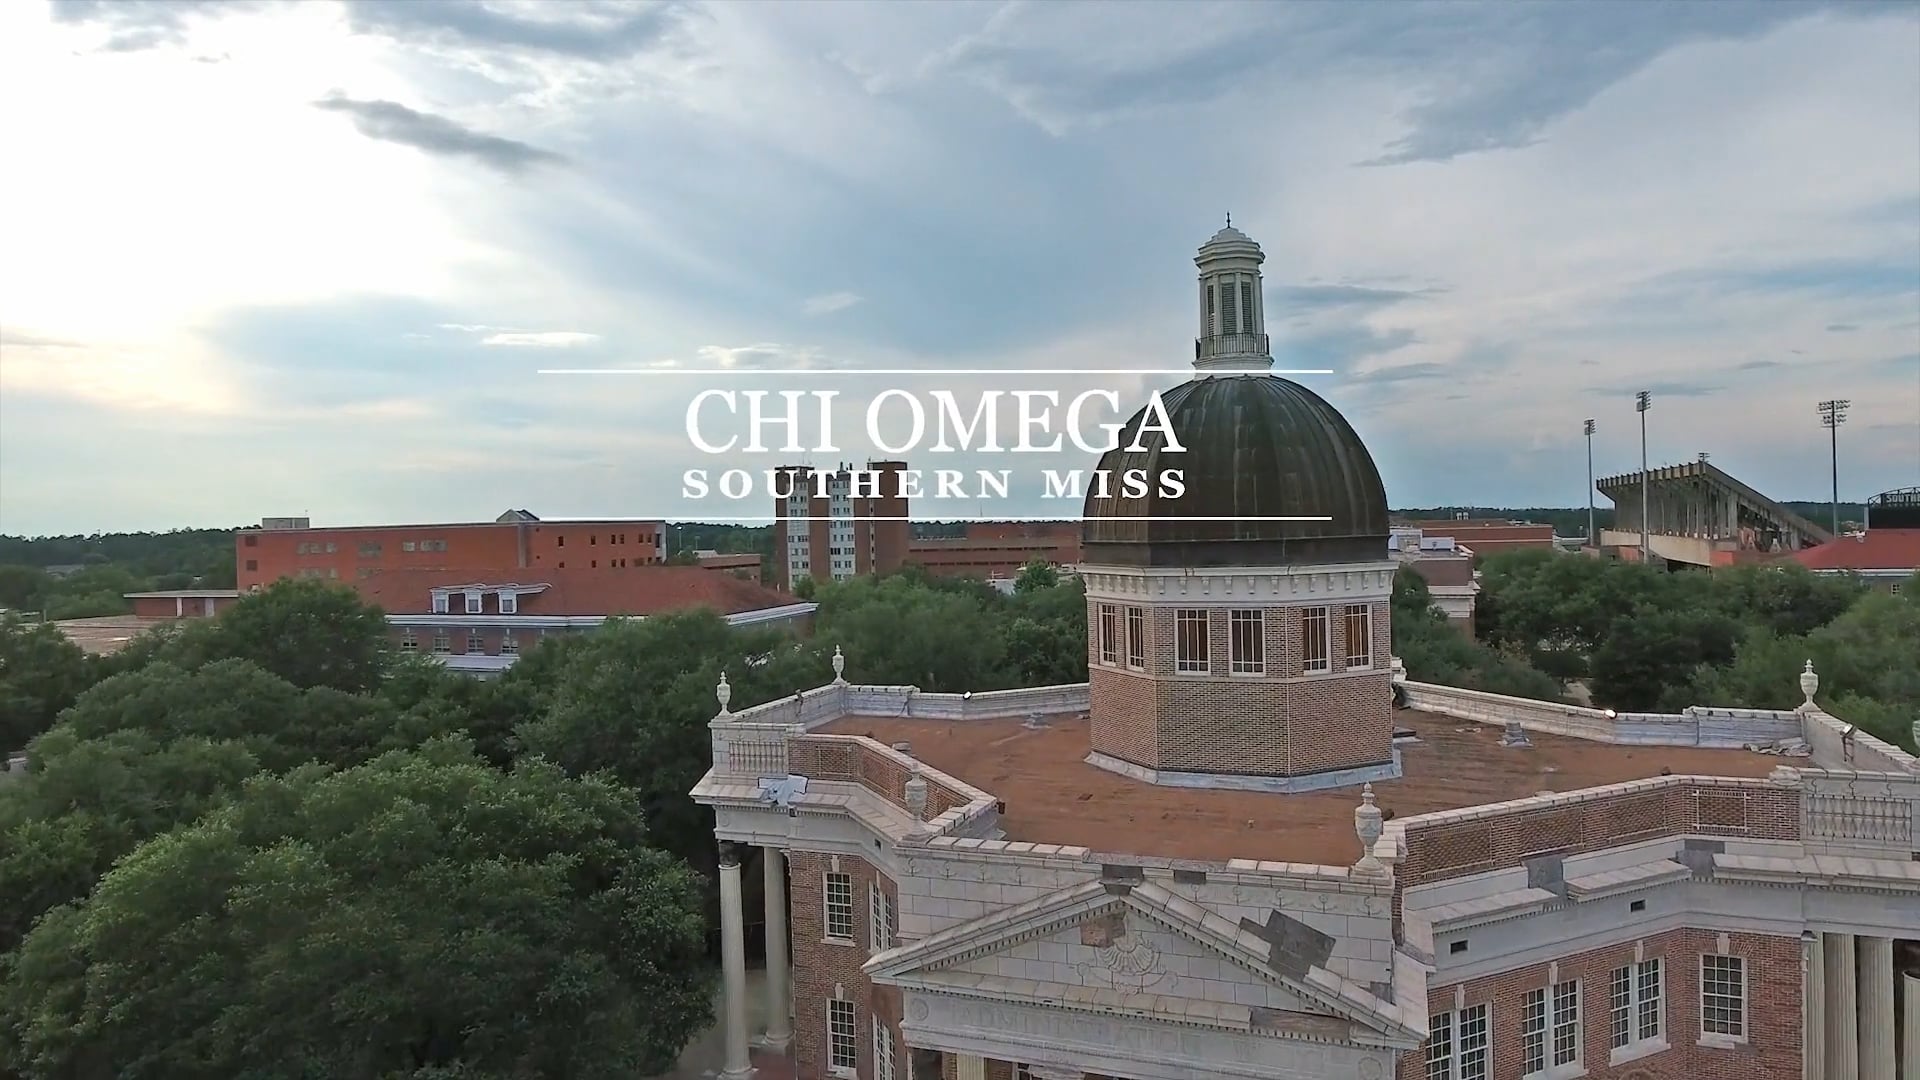 Chi Omega Southern Miss 2016